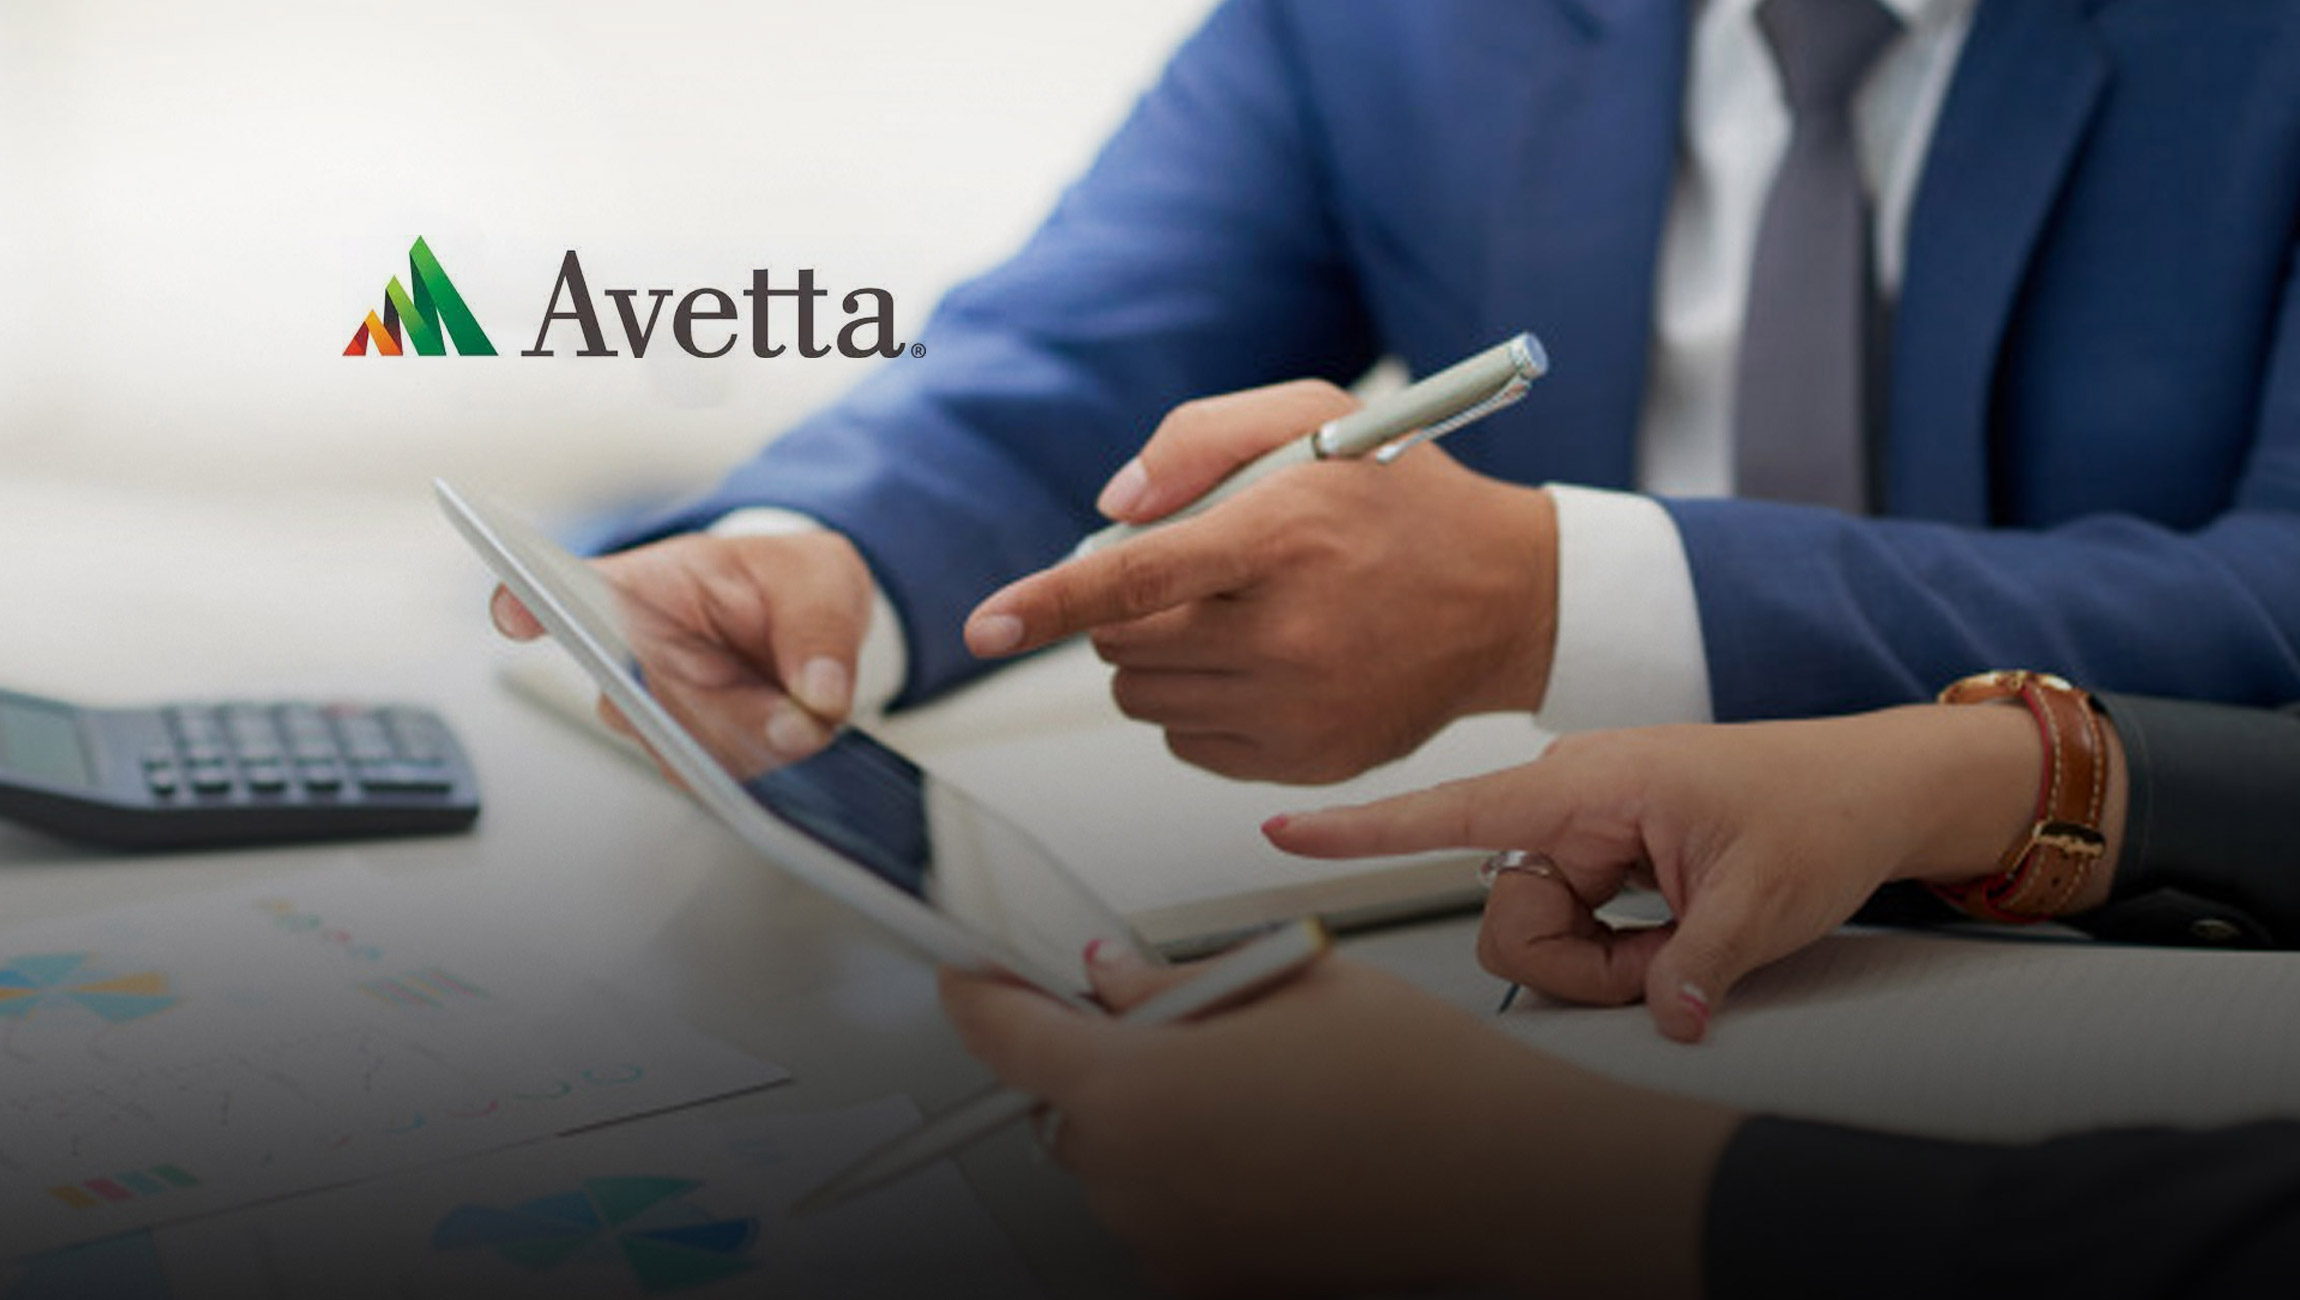 Avetta is Workforce Management Solution Provides the Most Comprehensive Way for Supply Chains to Ensure the Safety of Their Projects and Workers